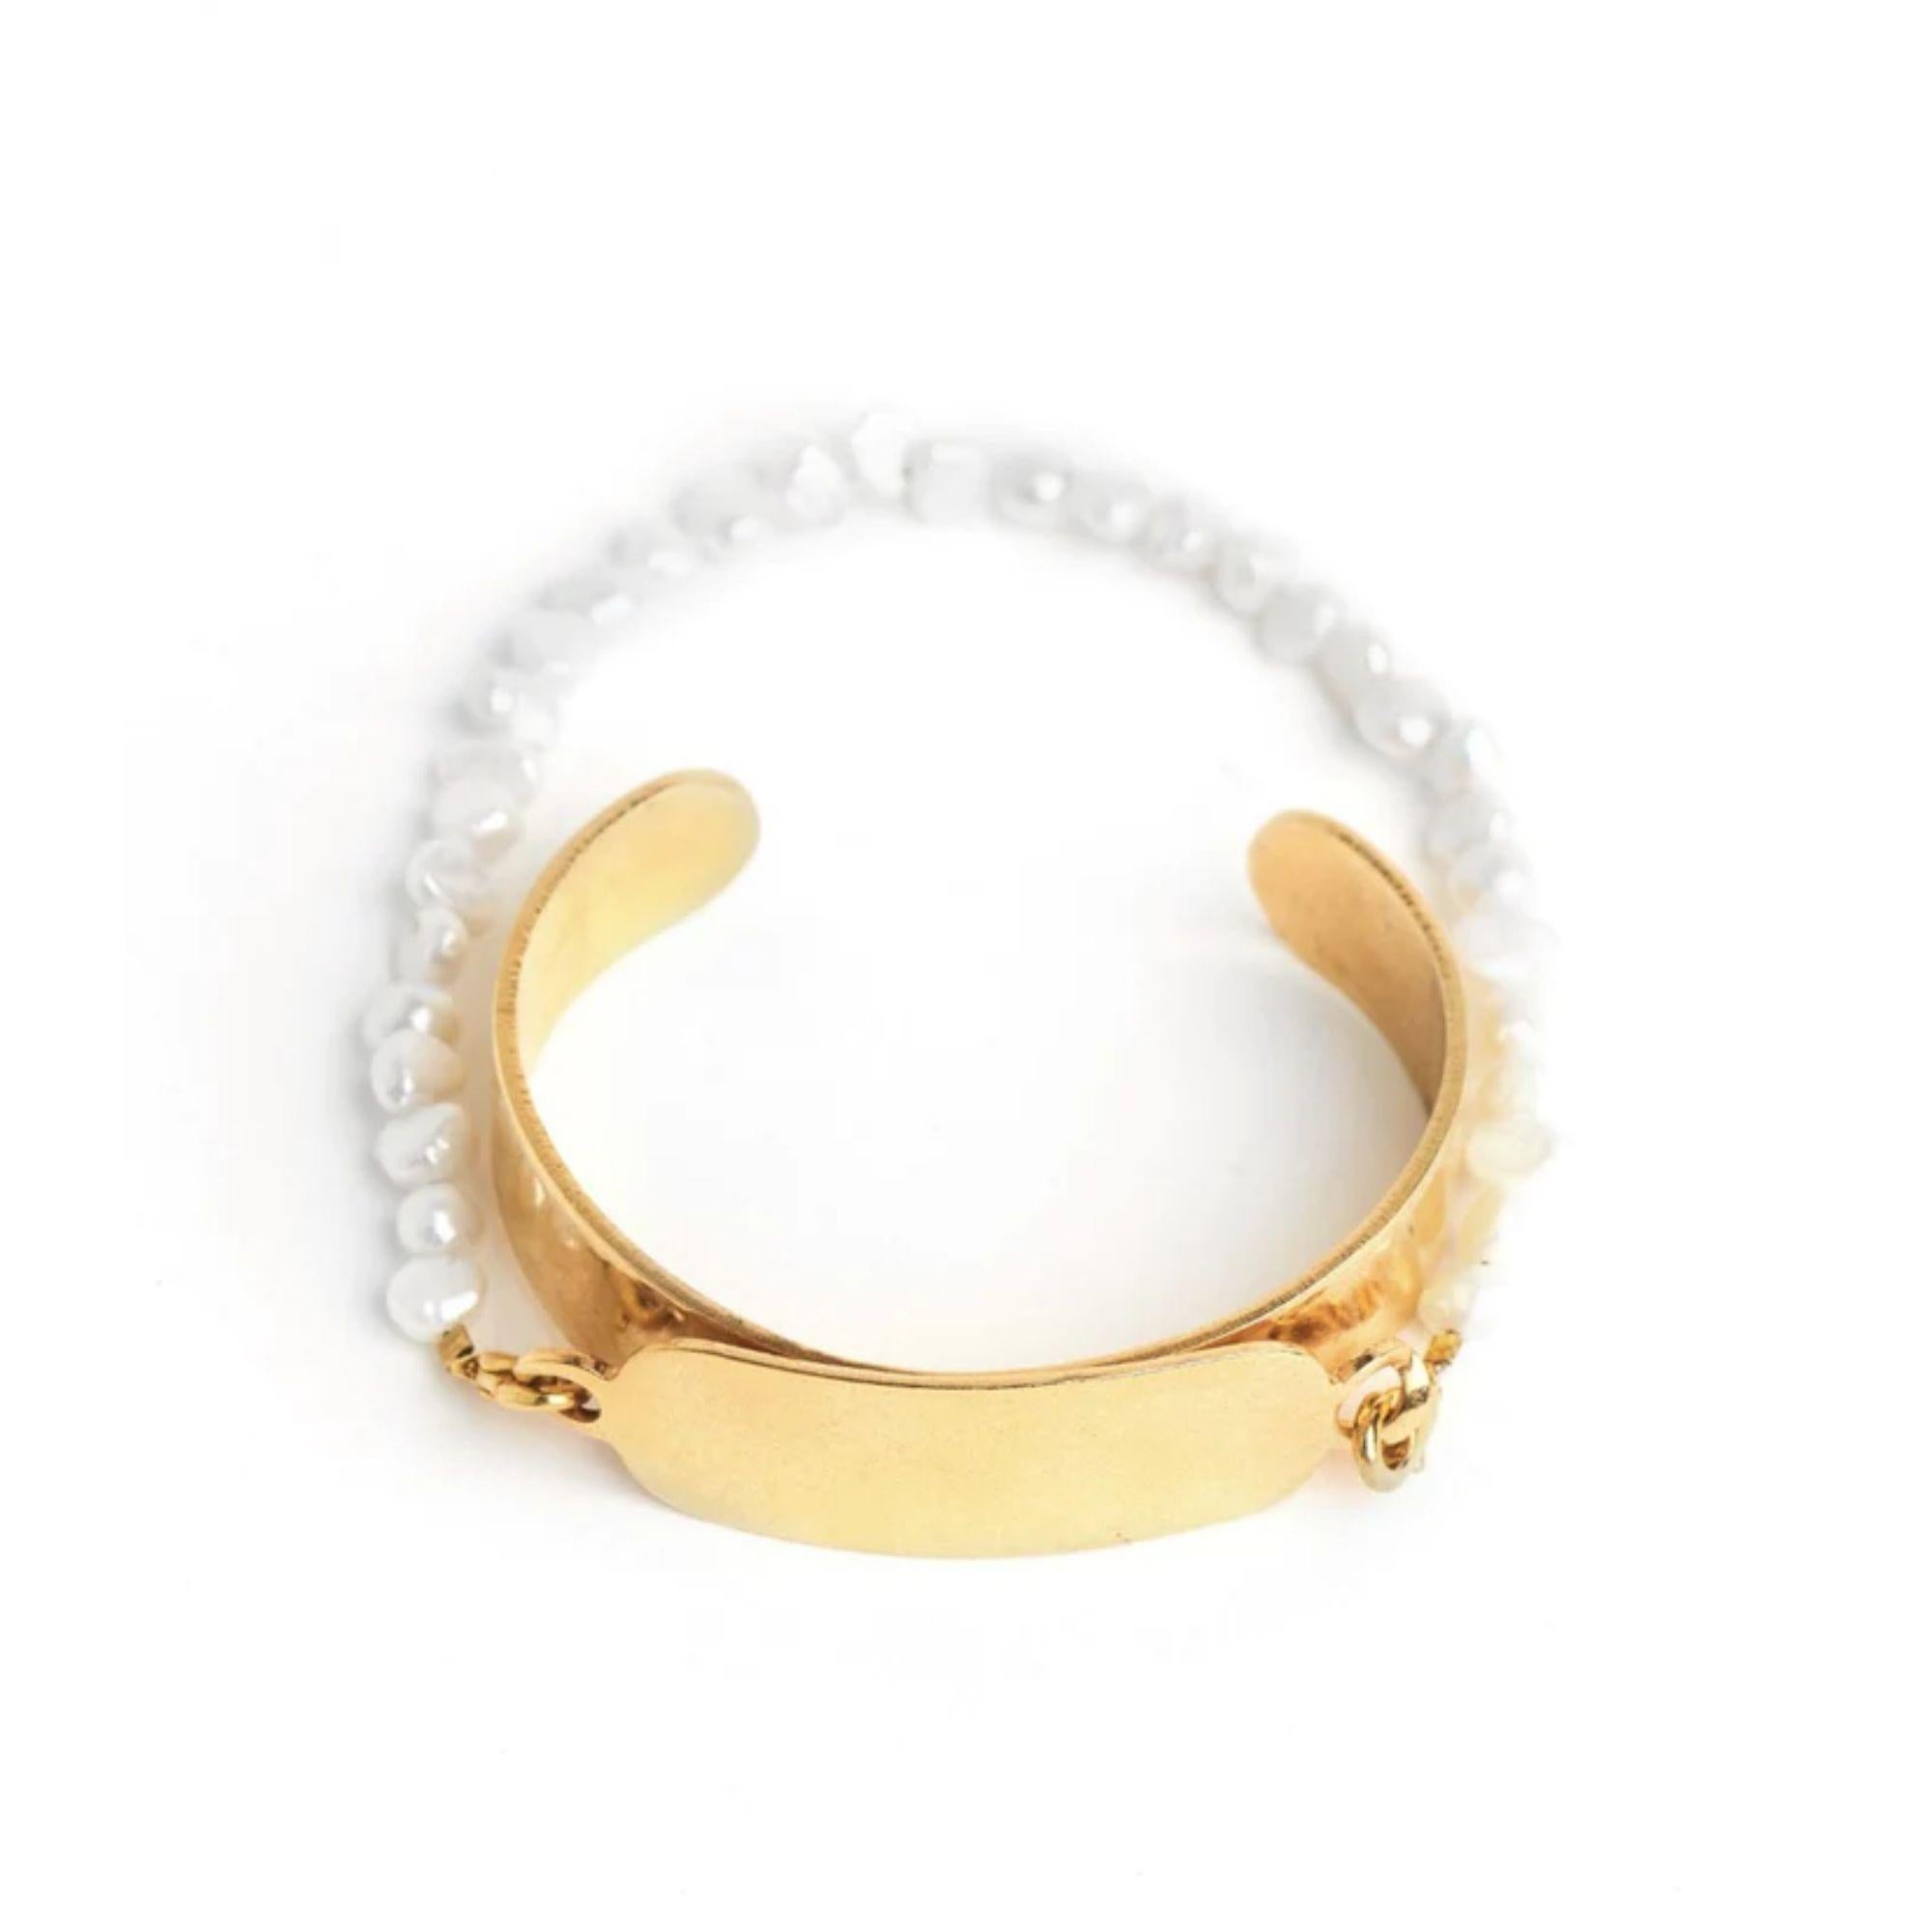 A new twist on a classic. Bet you never seen it done like this! Super chic removable freshwater pearl strand attached by lobster clasps to our classic ID cuff. Strand can be worn separately as well.

Additional Information:
Material: 24K Gold,